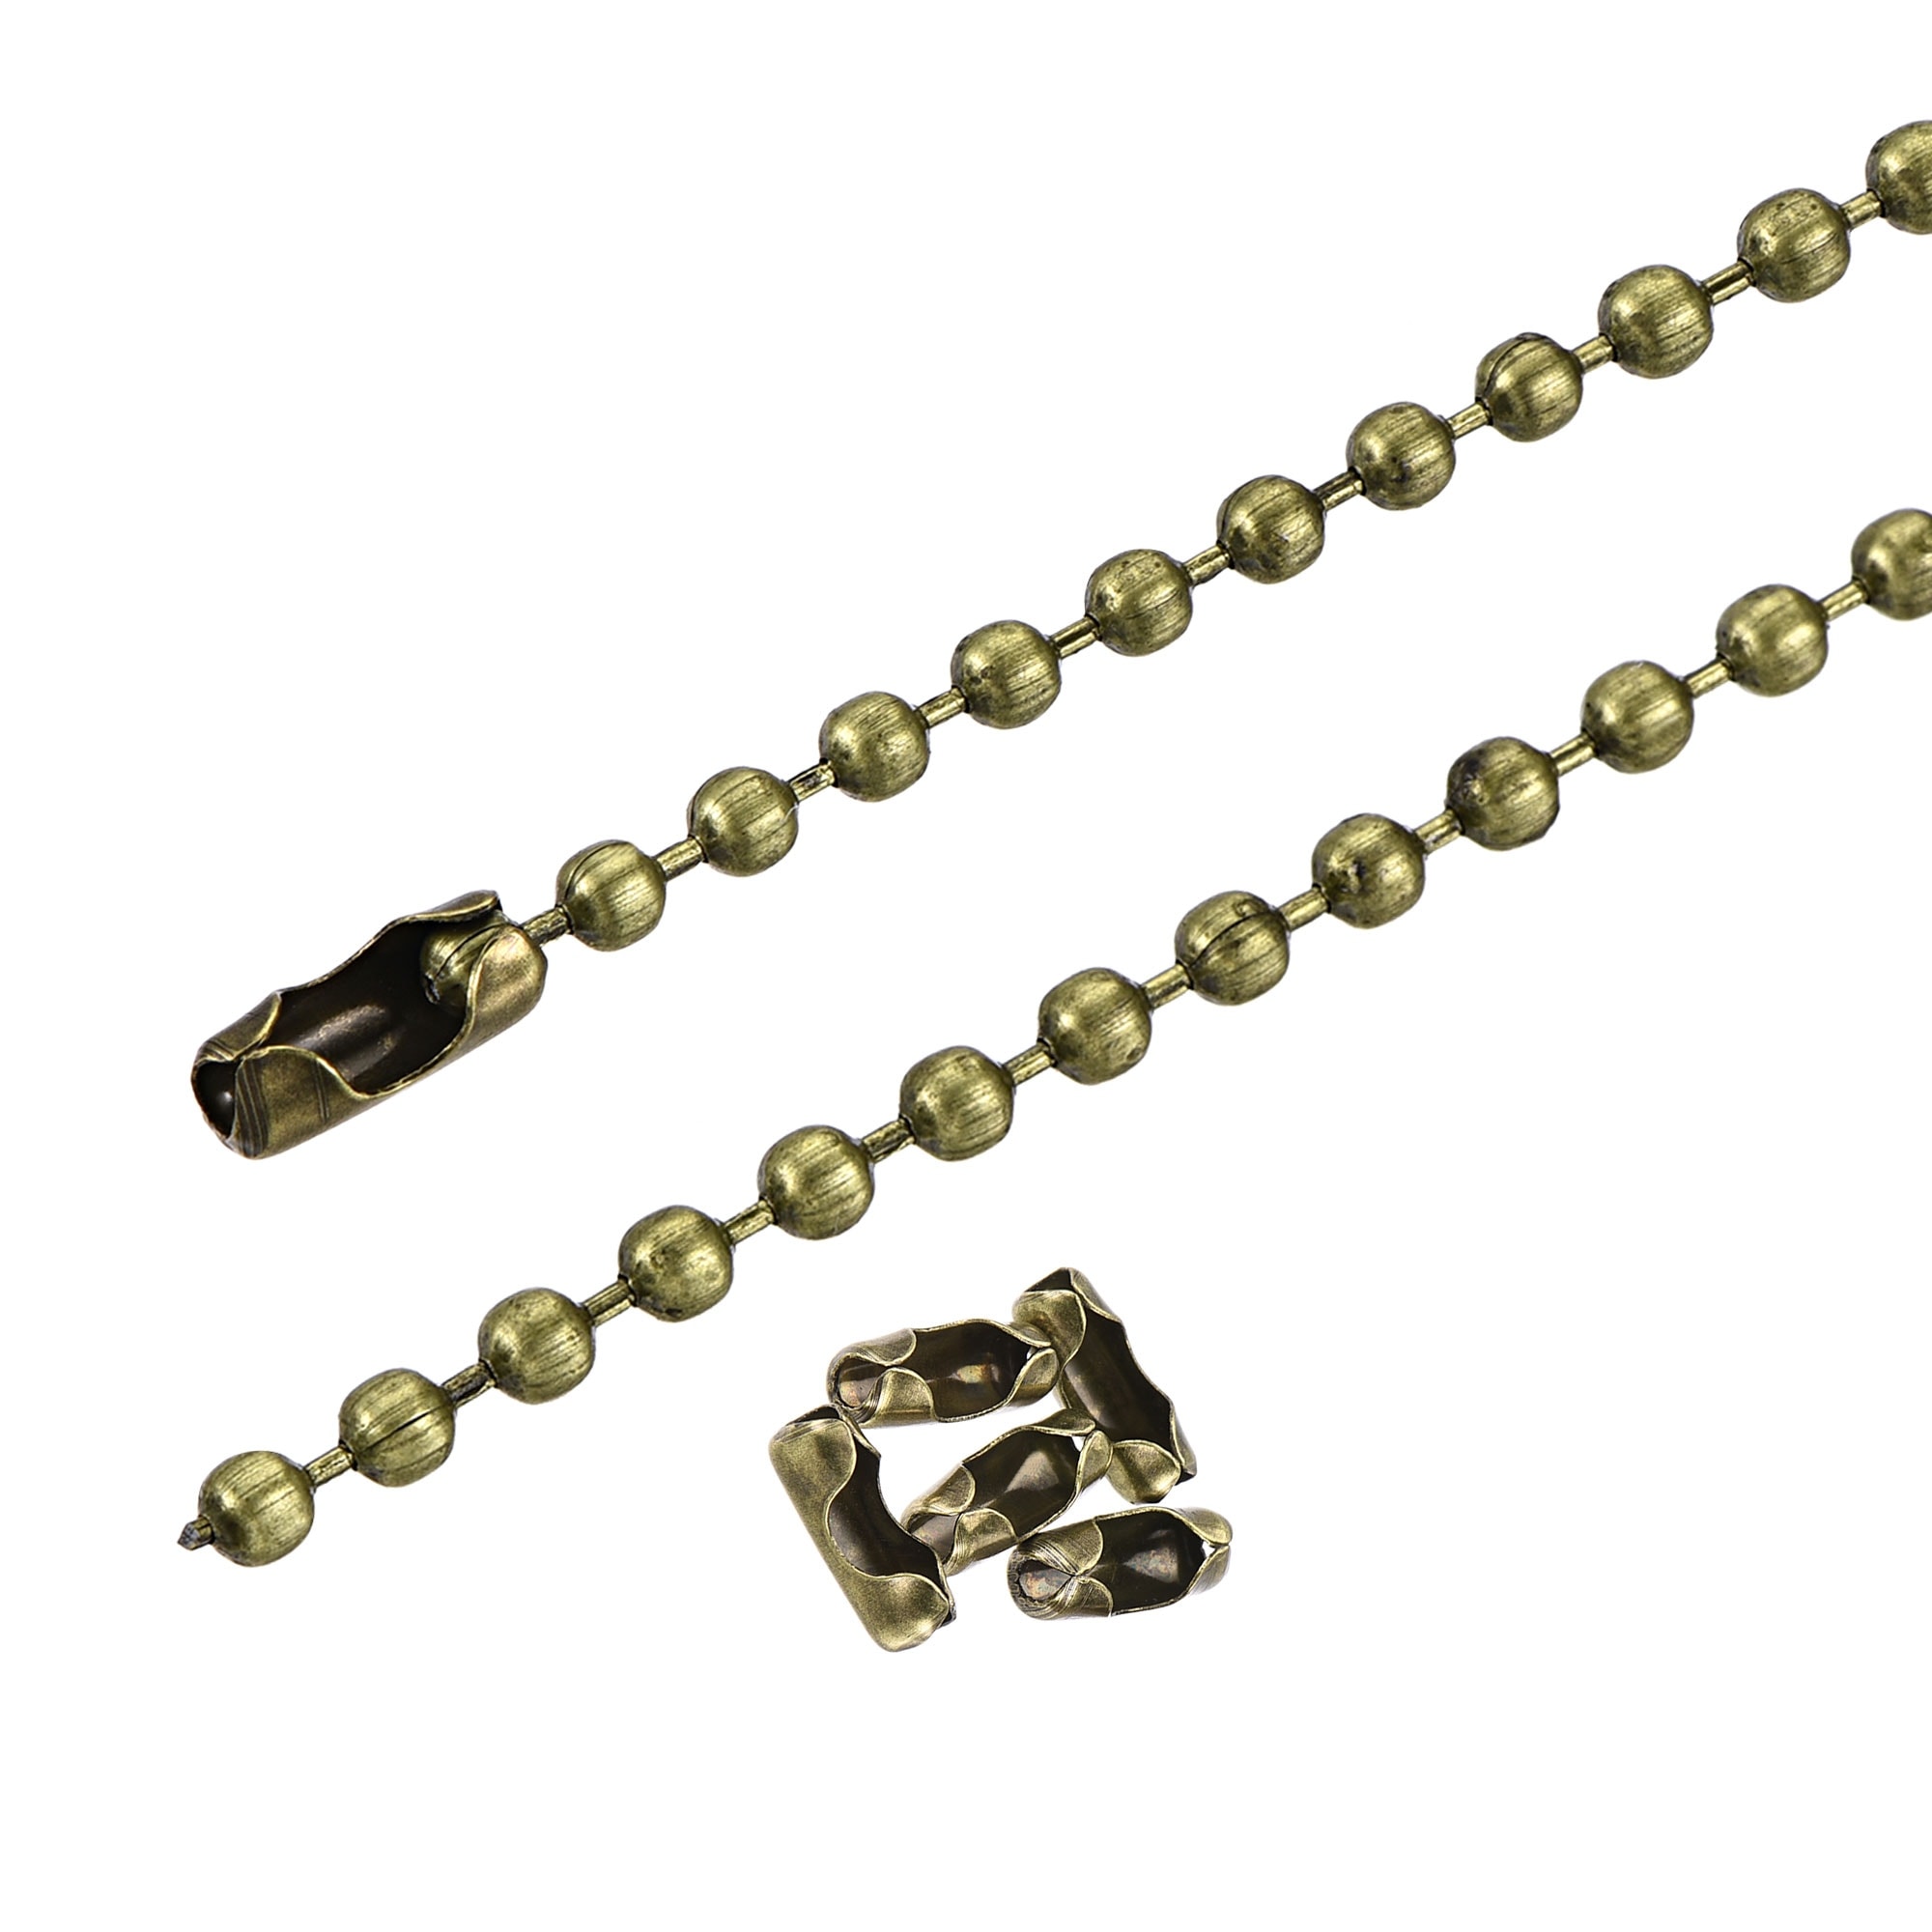 Pull Chain Extension 10ft Long 0.18 Inch Dia Beaded Link w Clasp 1 Set -  Silver Tone - Bed Bath & Beyond - 37314234